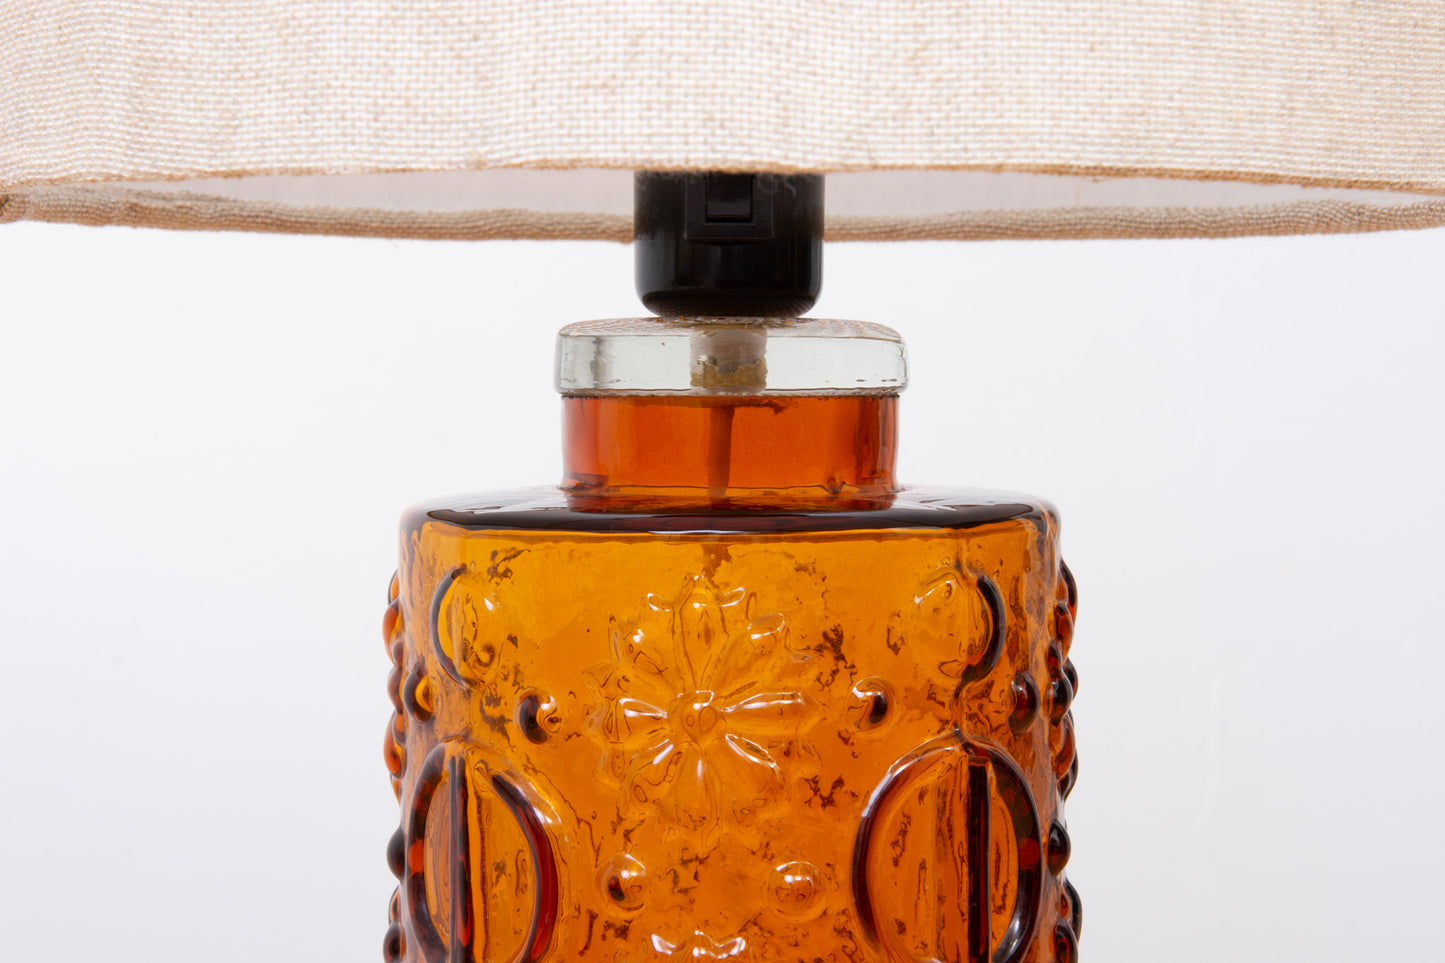 Two available: 1960s amber glass table lamp by Gustav Leek